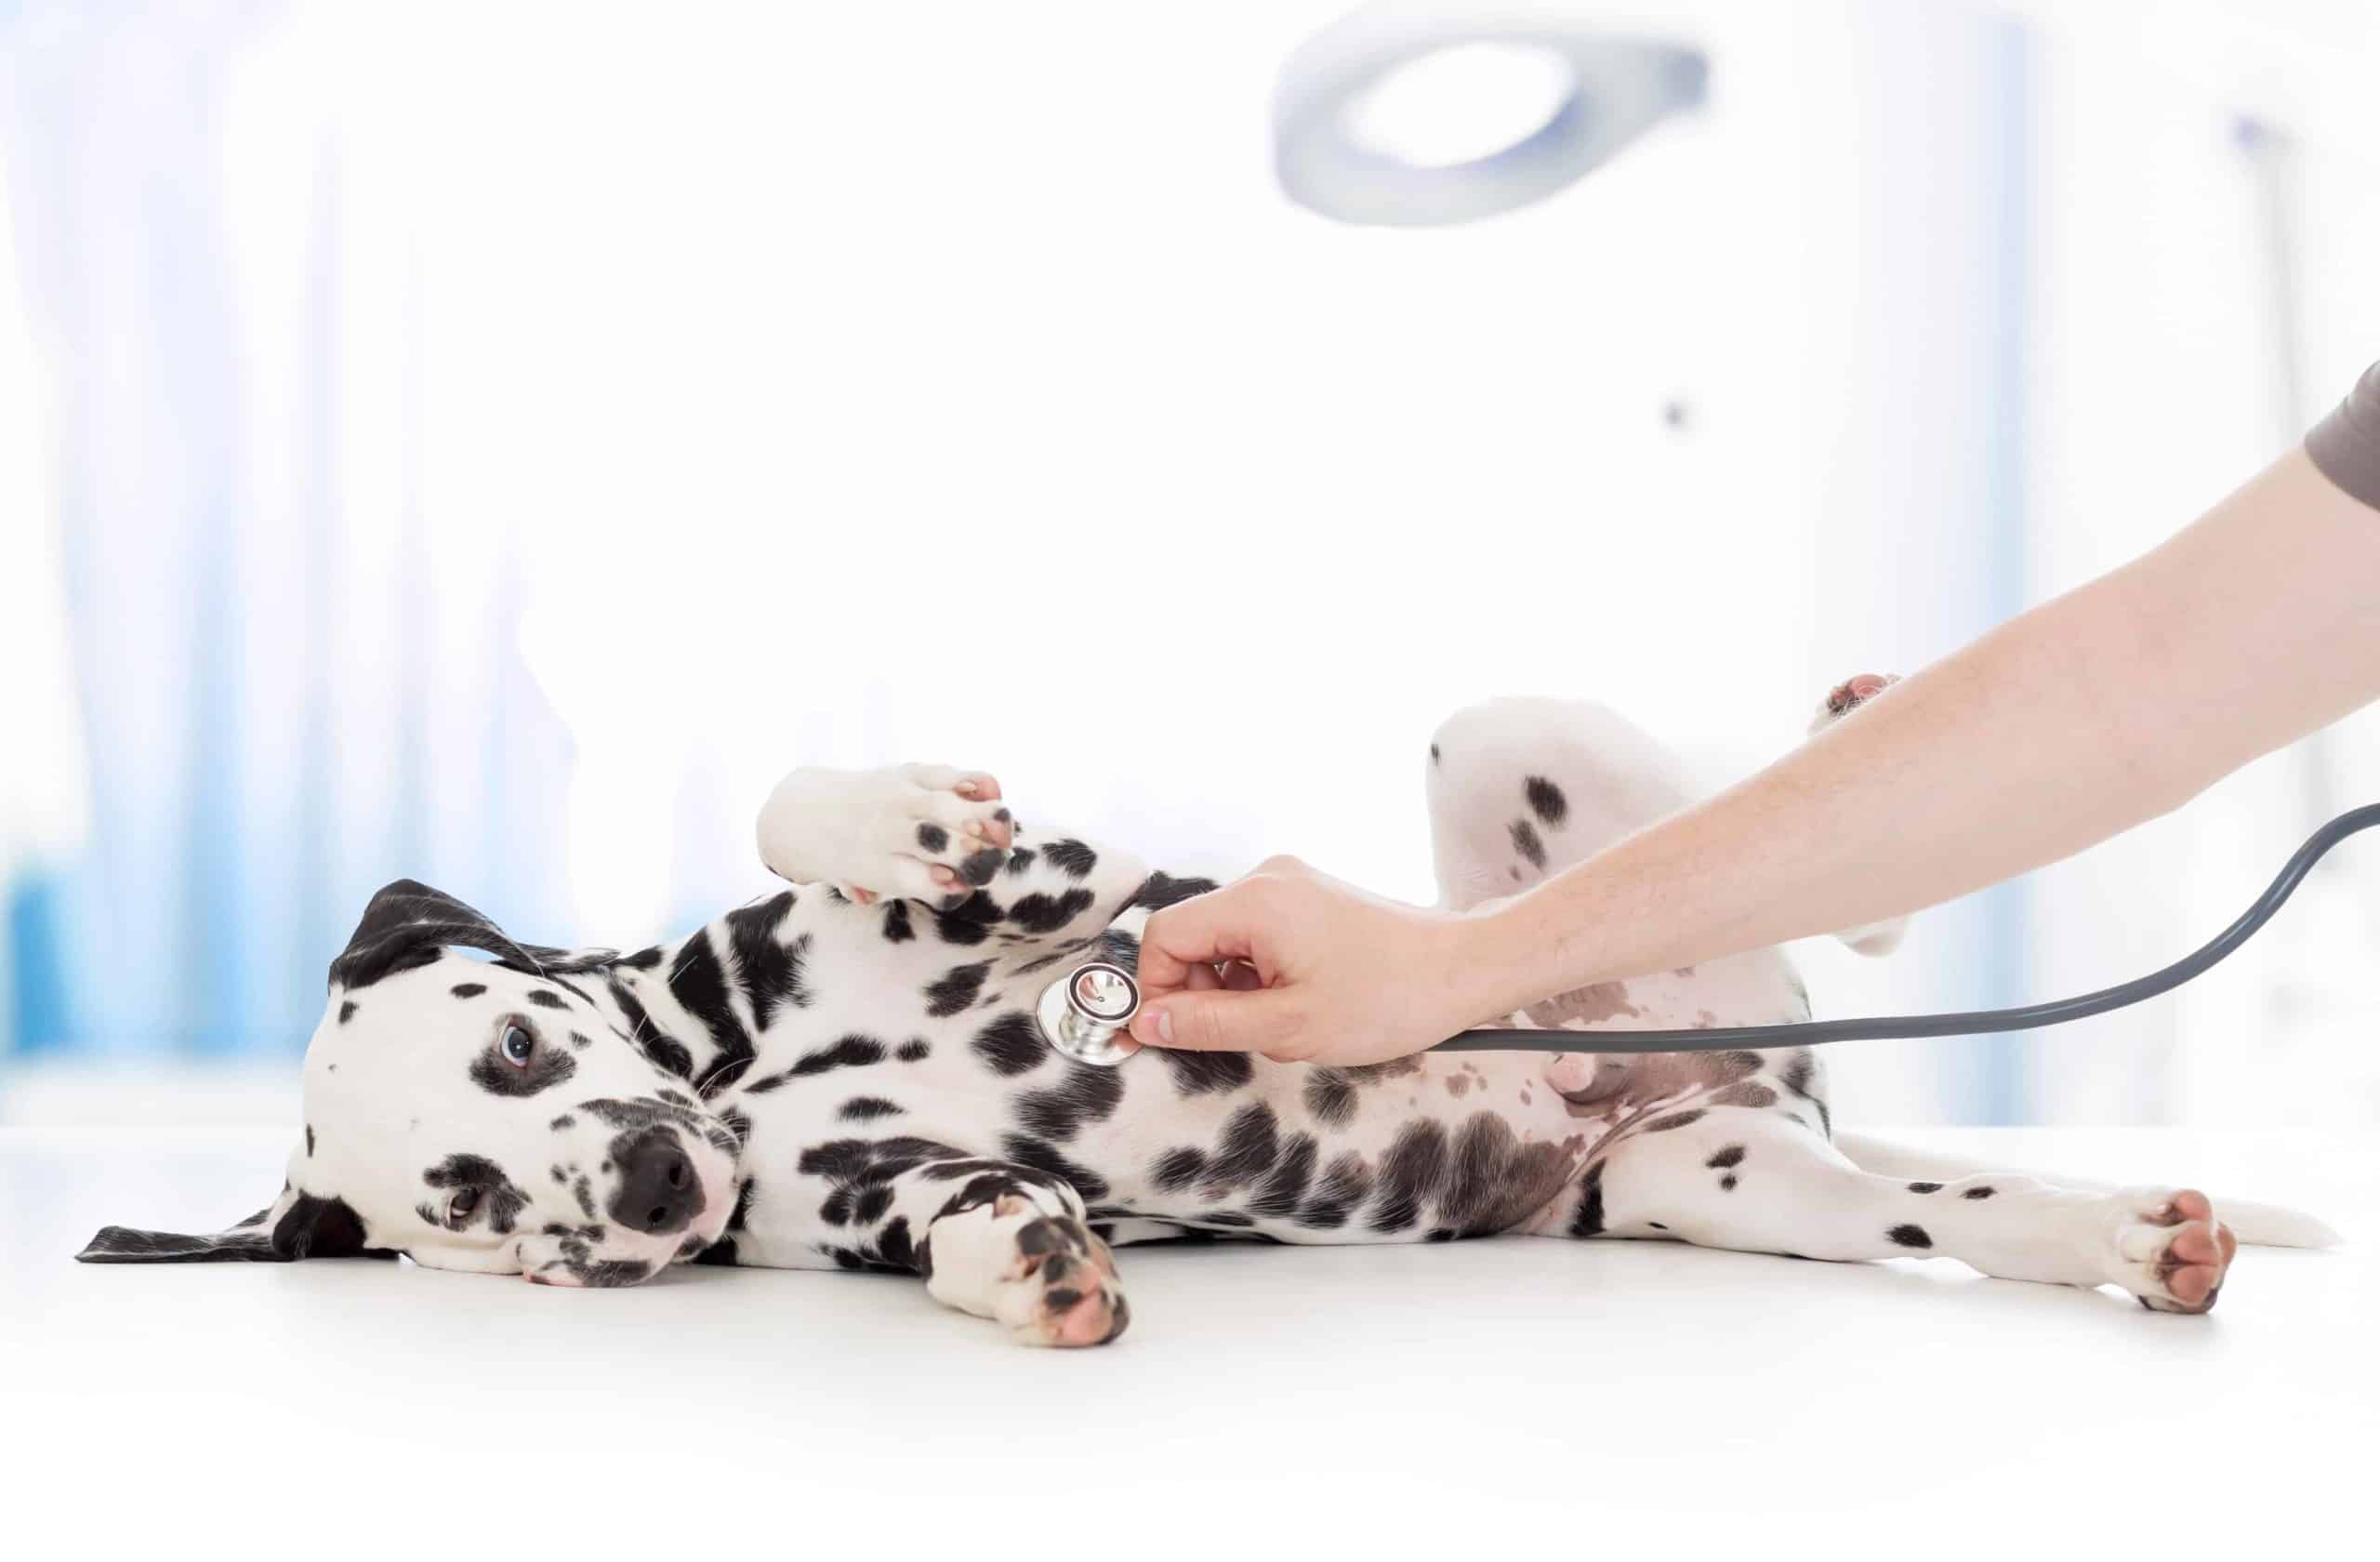 Vet examines Dalmatian puppy. Protect your puppy: Schedule regular vet visits, pet-proof your house, use a leash, feed a healthy diet, and use a monitoring device.